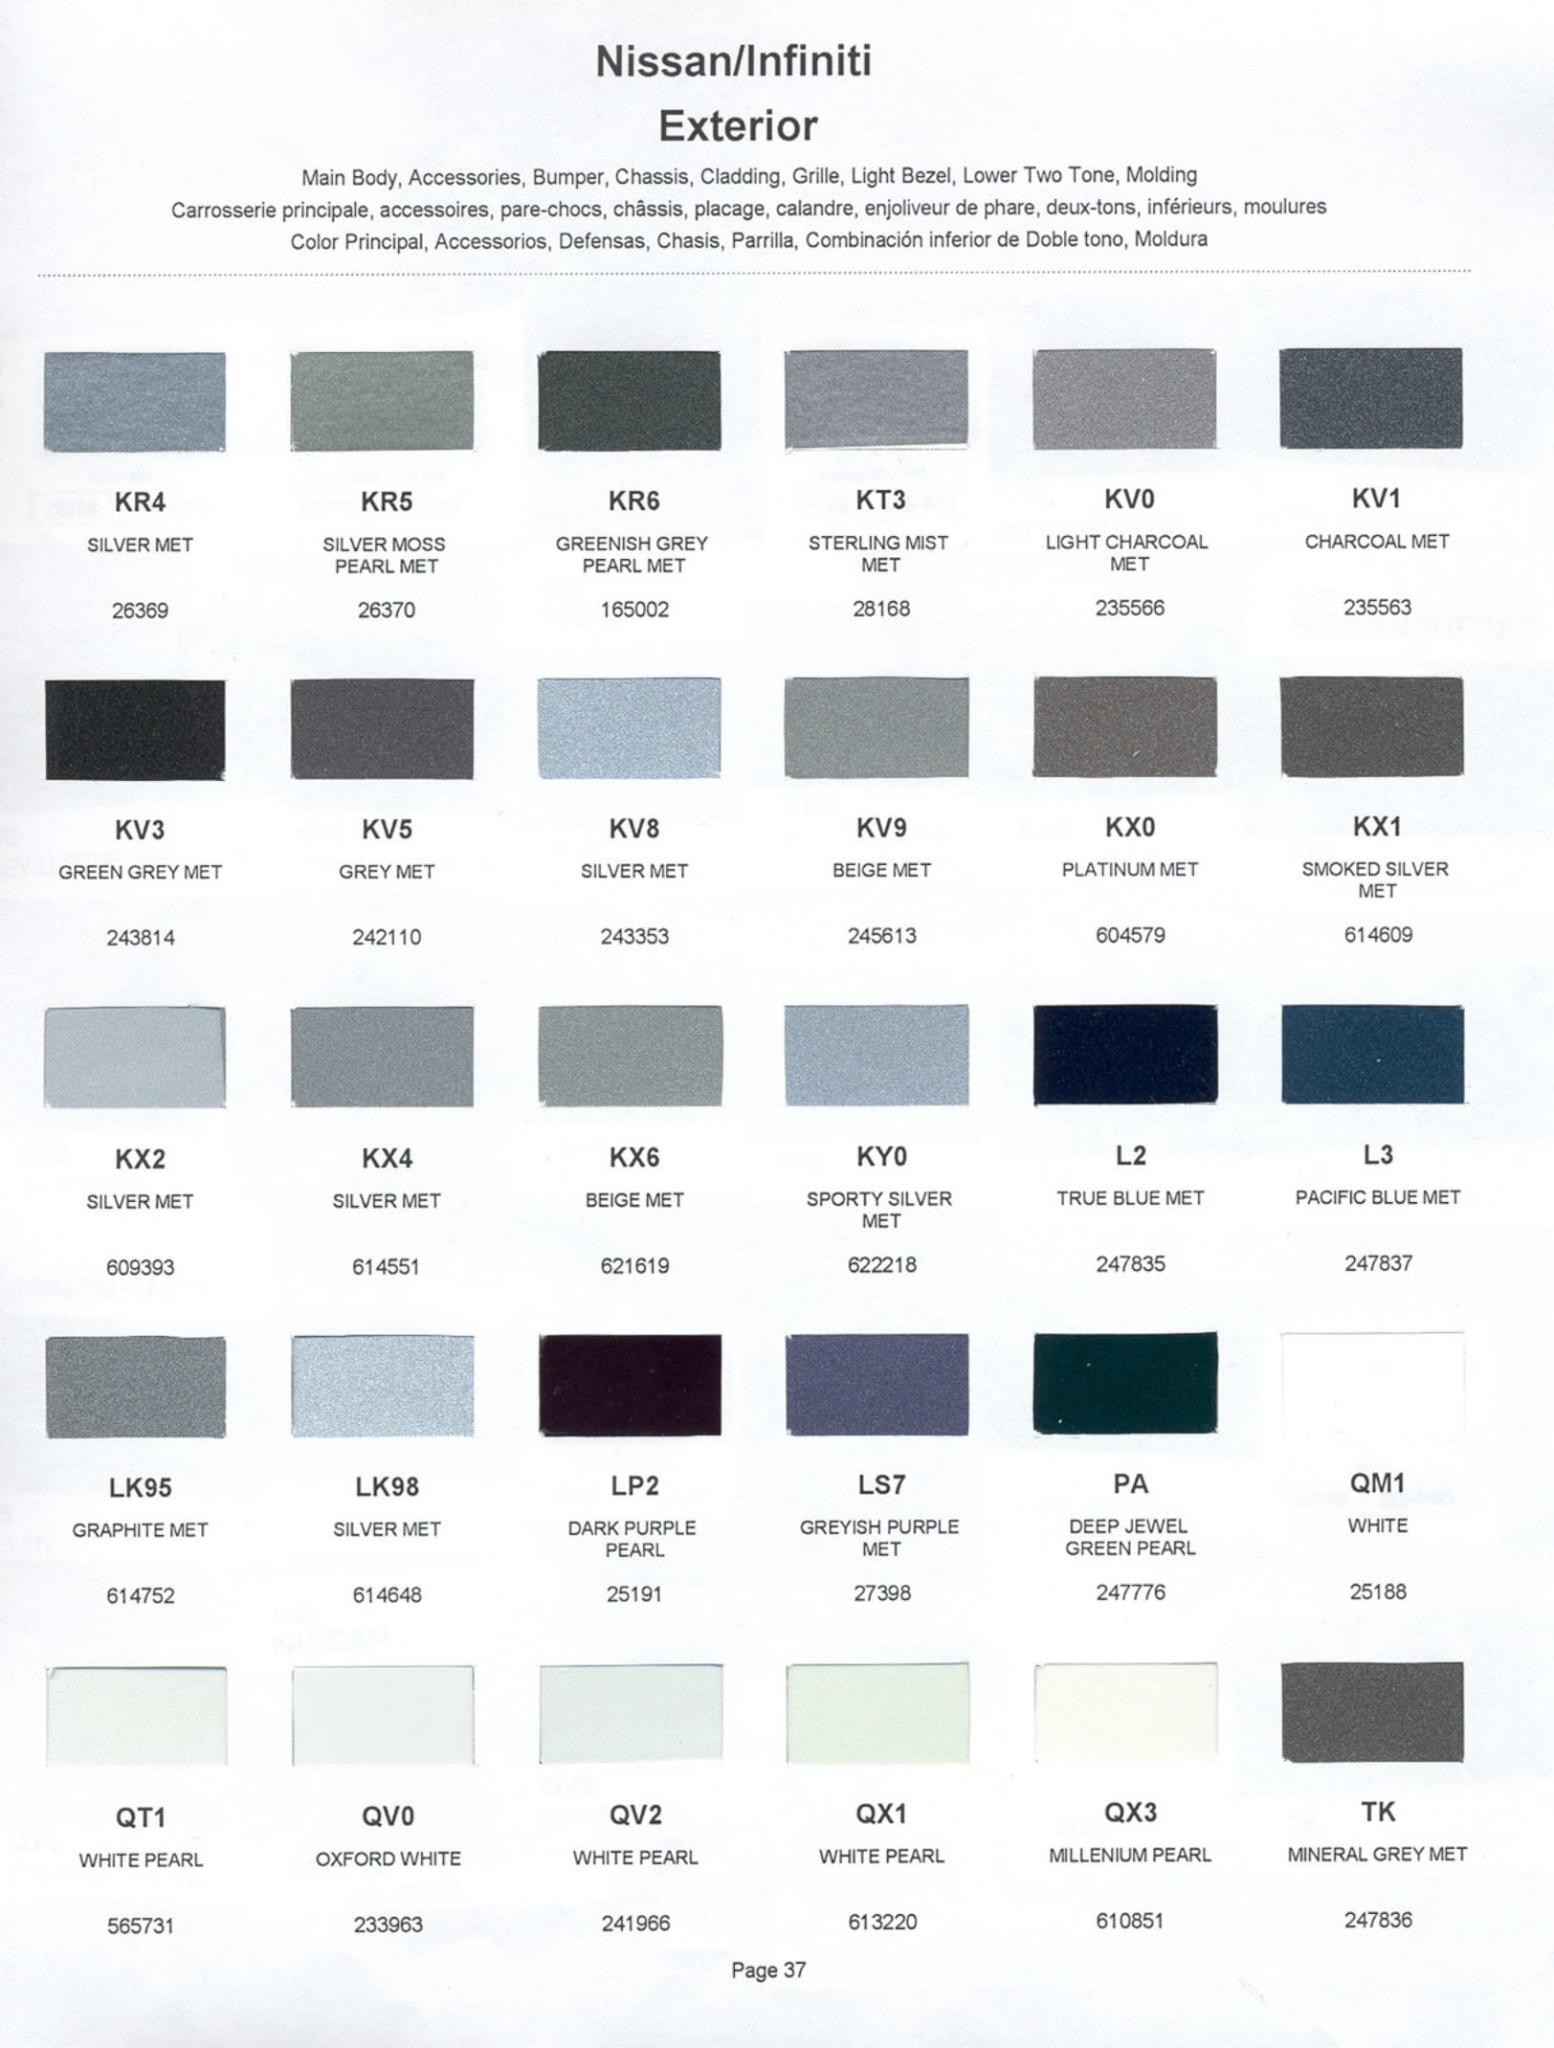 Nissan and Infiniti Paint Codes and Color Chart